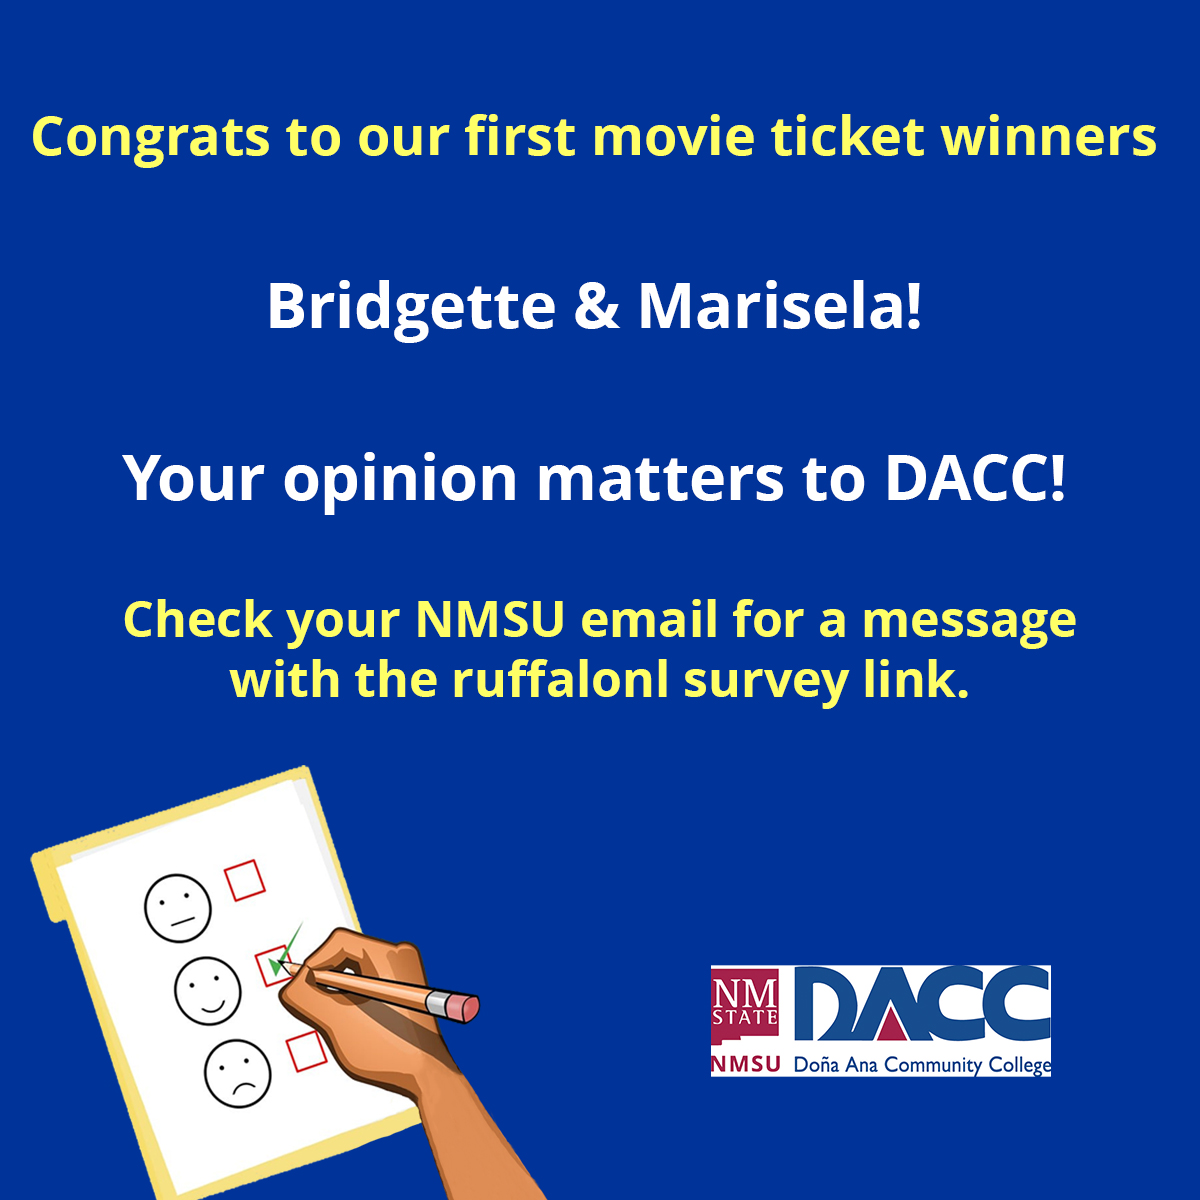 Congrats to our first movie ticket winners – Bridgette and Marisela! Check your email today for the link to the Student Satisfaction Survey and your chance to win. Your Opinion Matters to DACC! #WeAreDACC